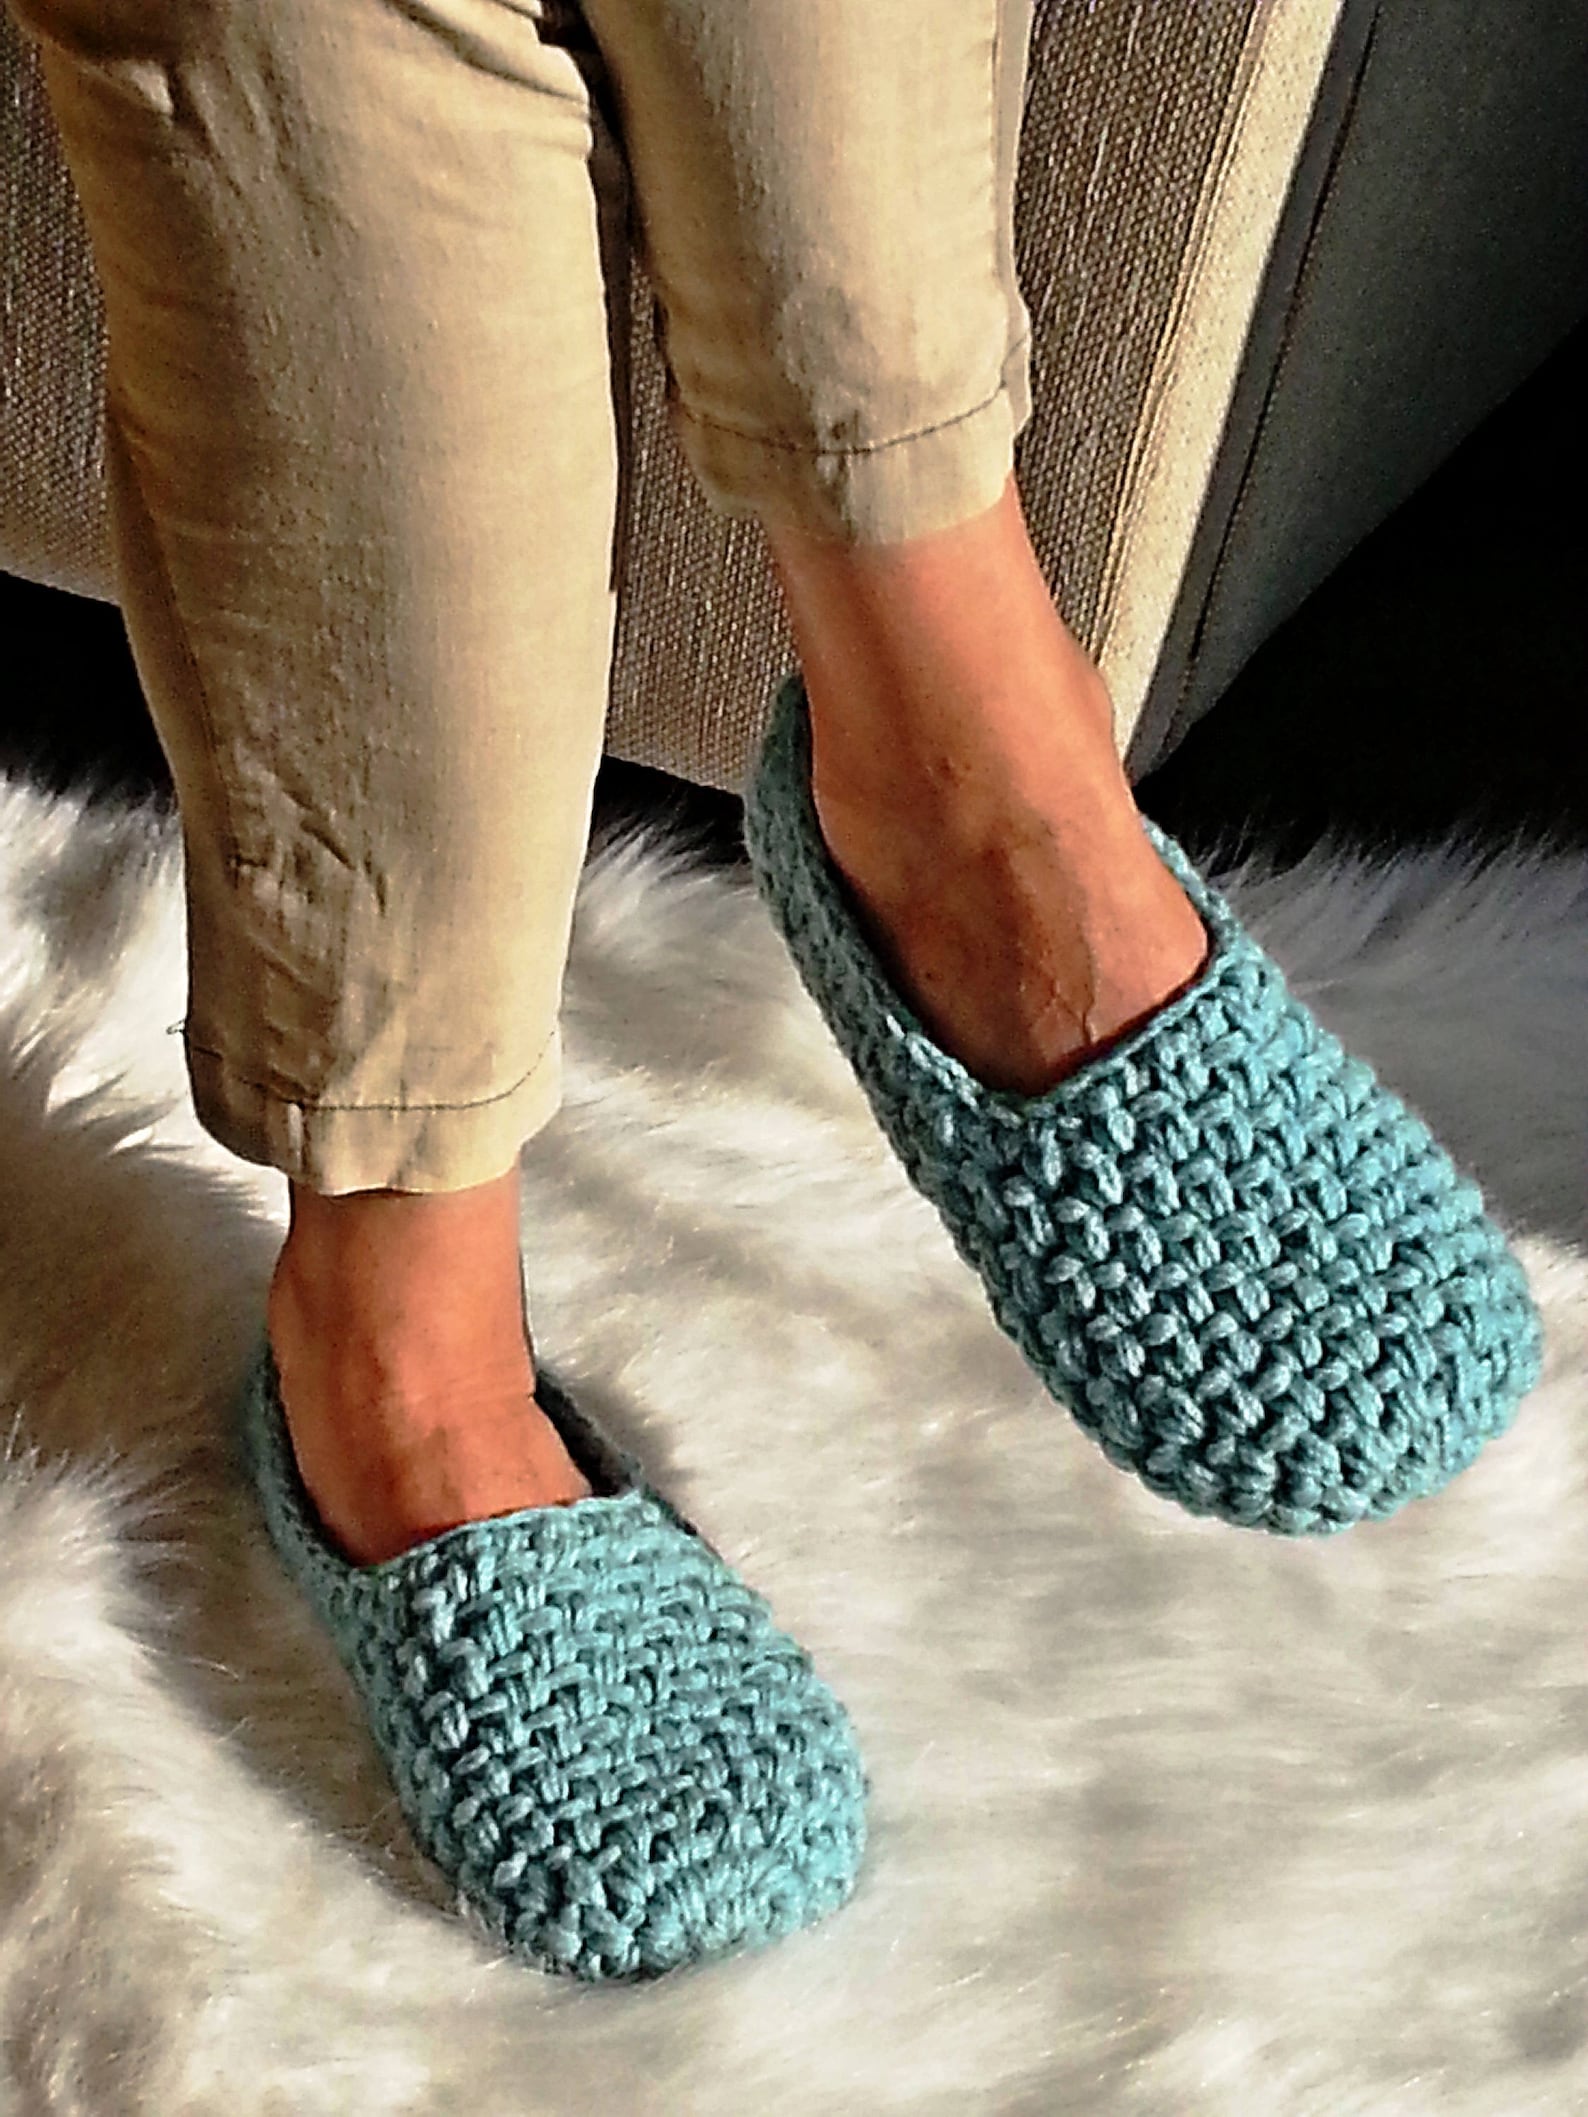 turquoise flats women's shoes